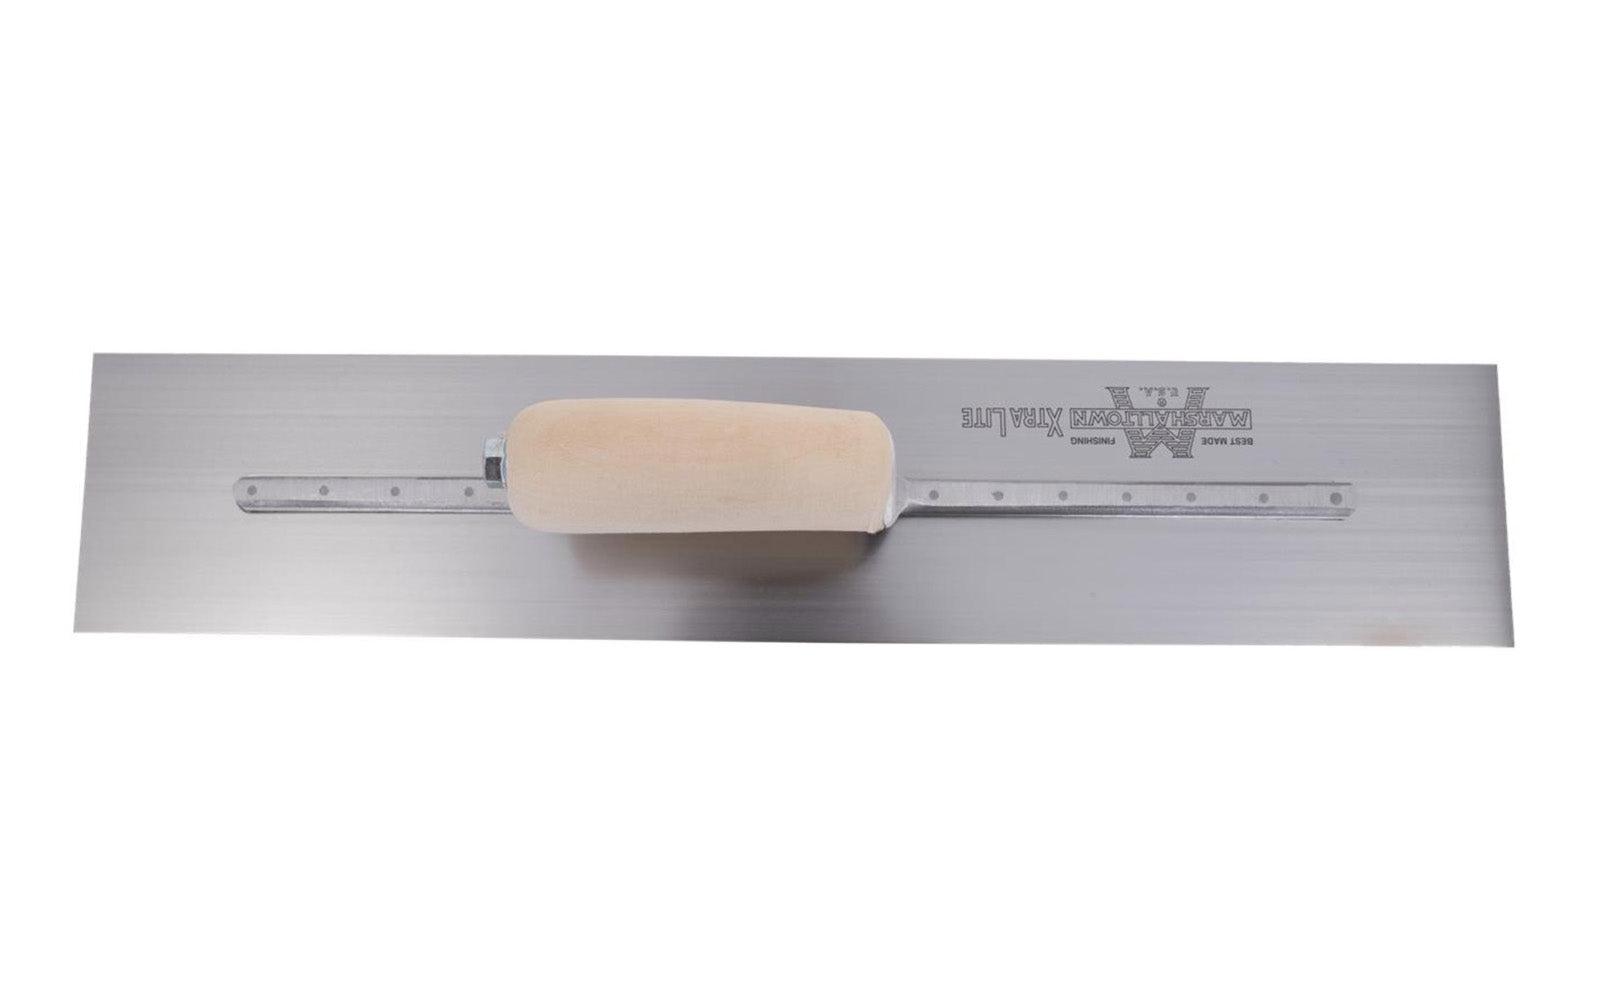 Marshalltown 18" x 4-1/2" Finishing Trowel with a blade that is tempered, ground, and polished for enhanced performance. MXS77.